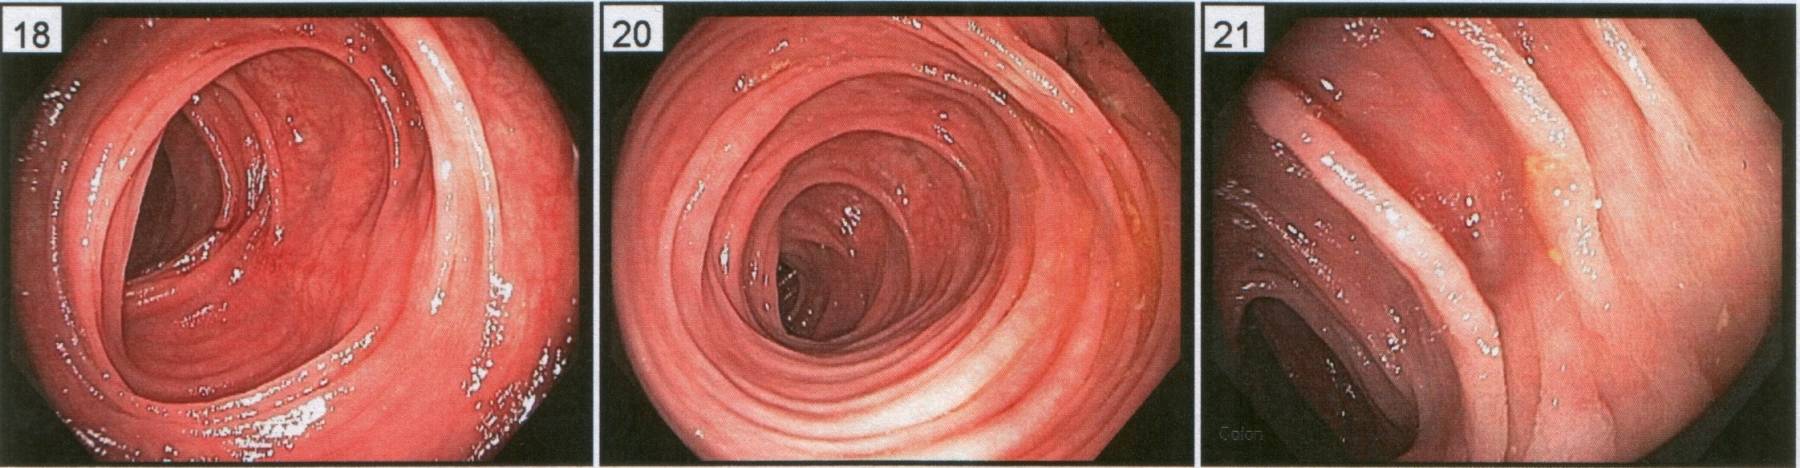 Endoscopic images of the transverse colon.